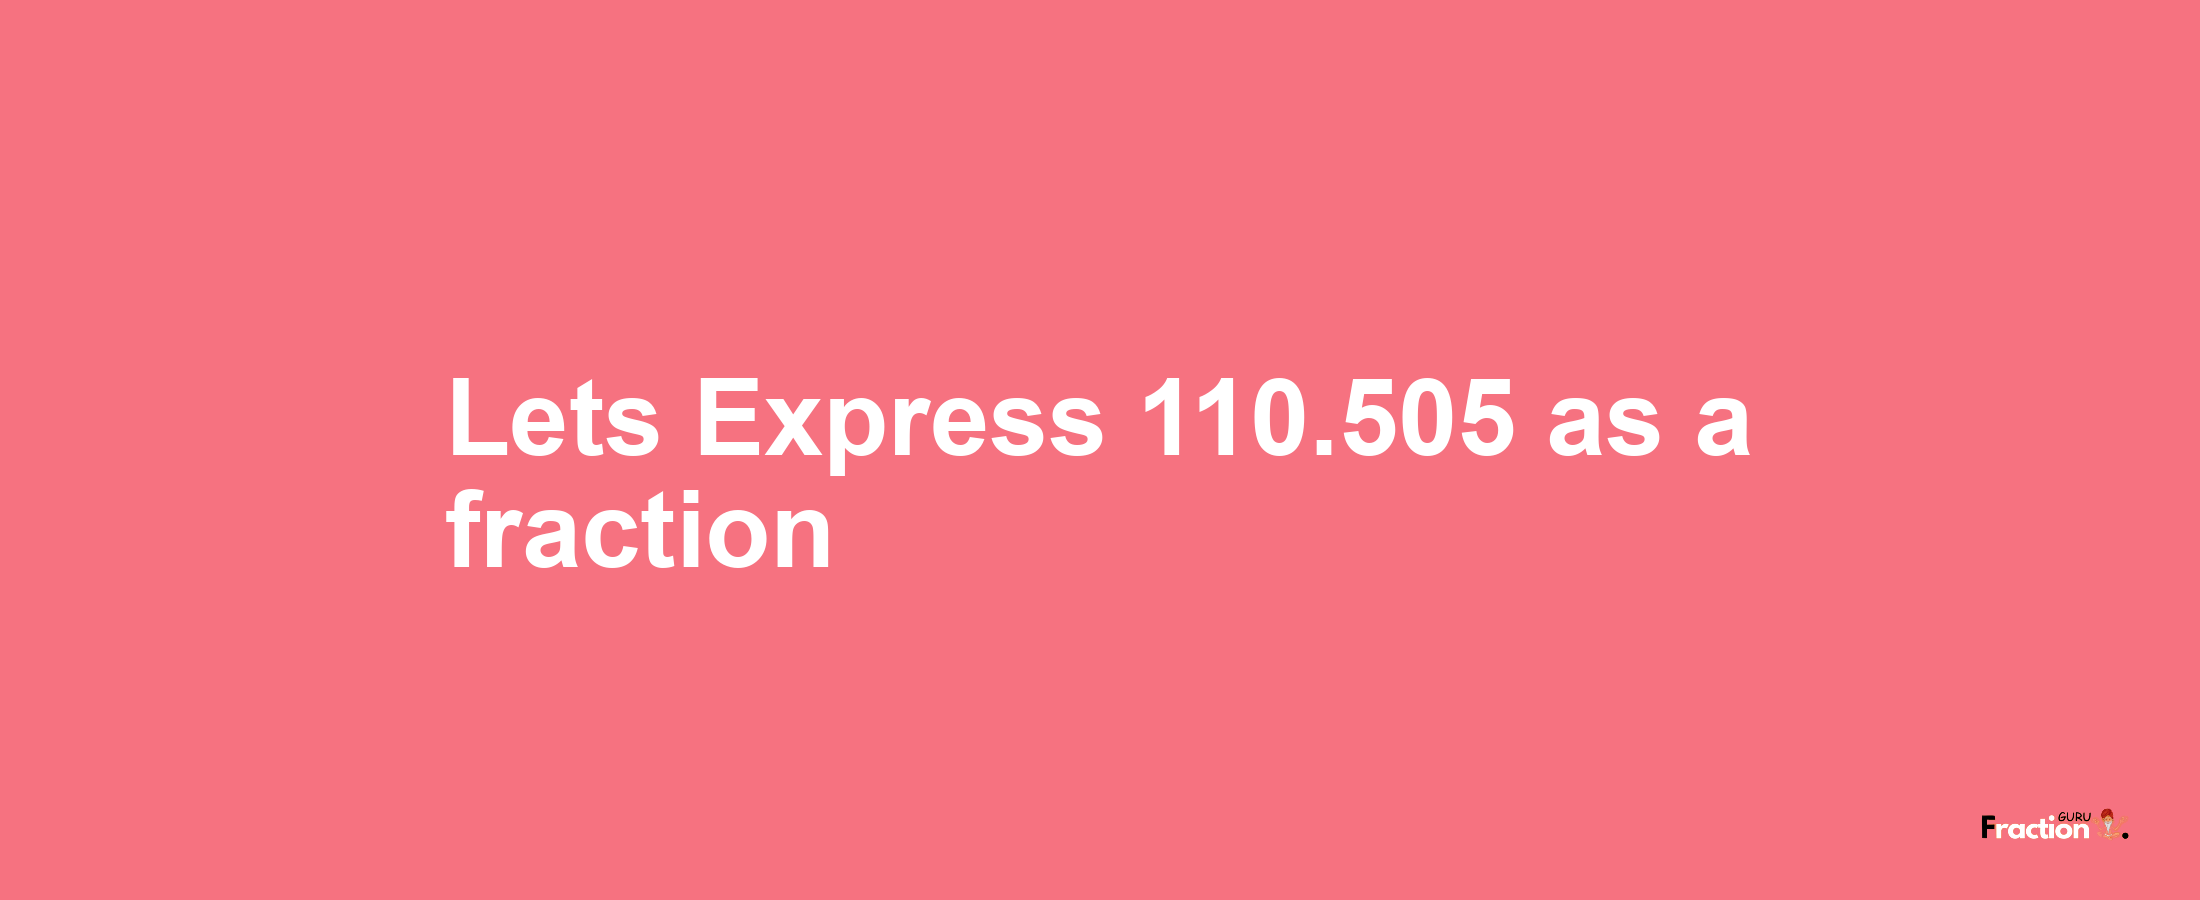 Lets Express 110.505 as afraction